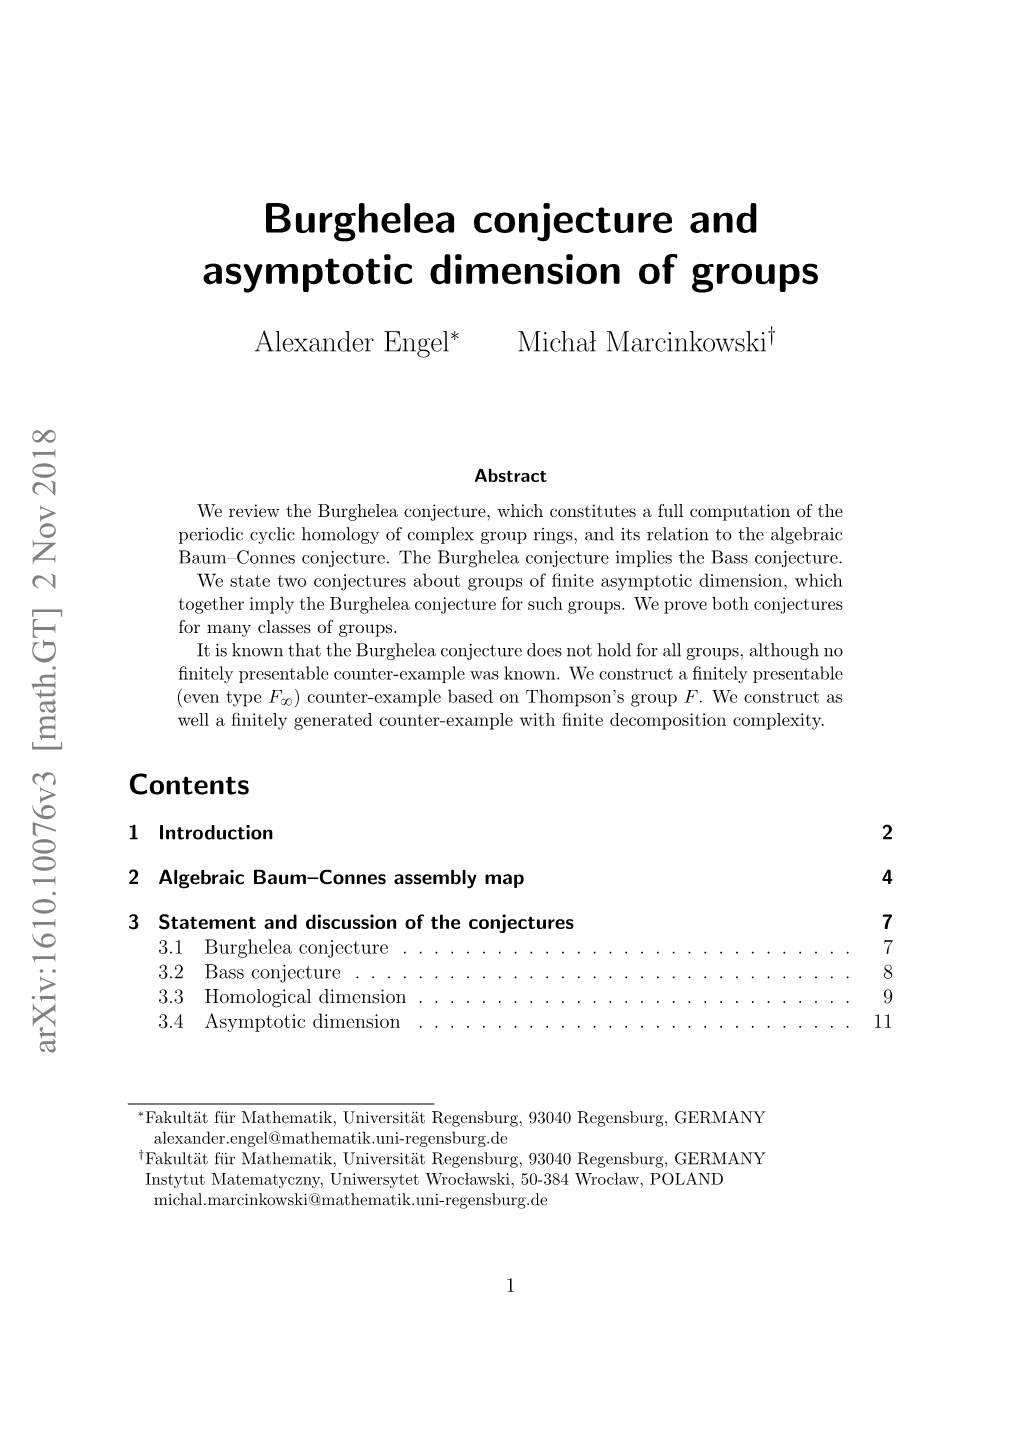 Burghelea Conjecture and Asymptotic Dimension of Groups